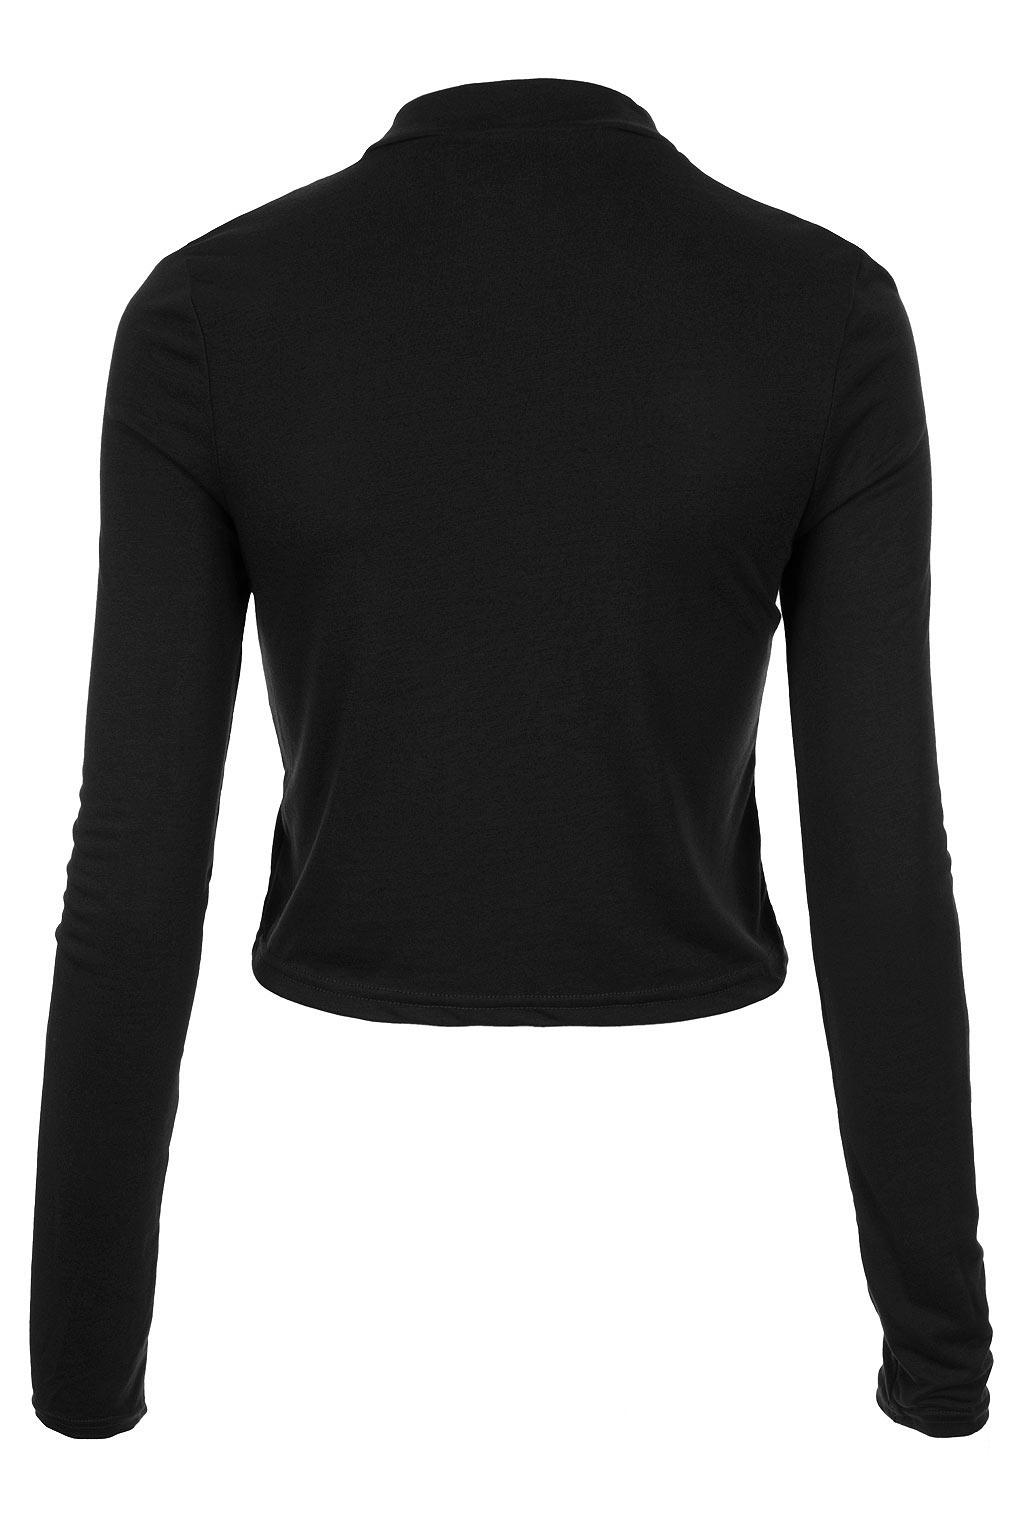 Topshop Polo Neck Long Sleeve Crop Top in Black | Lyst